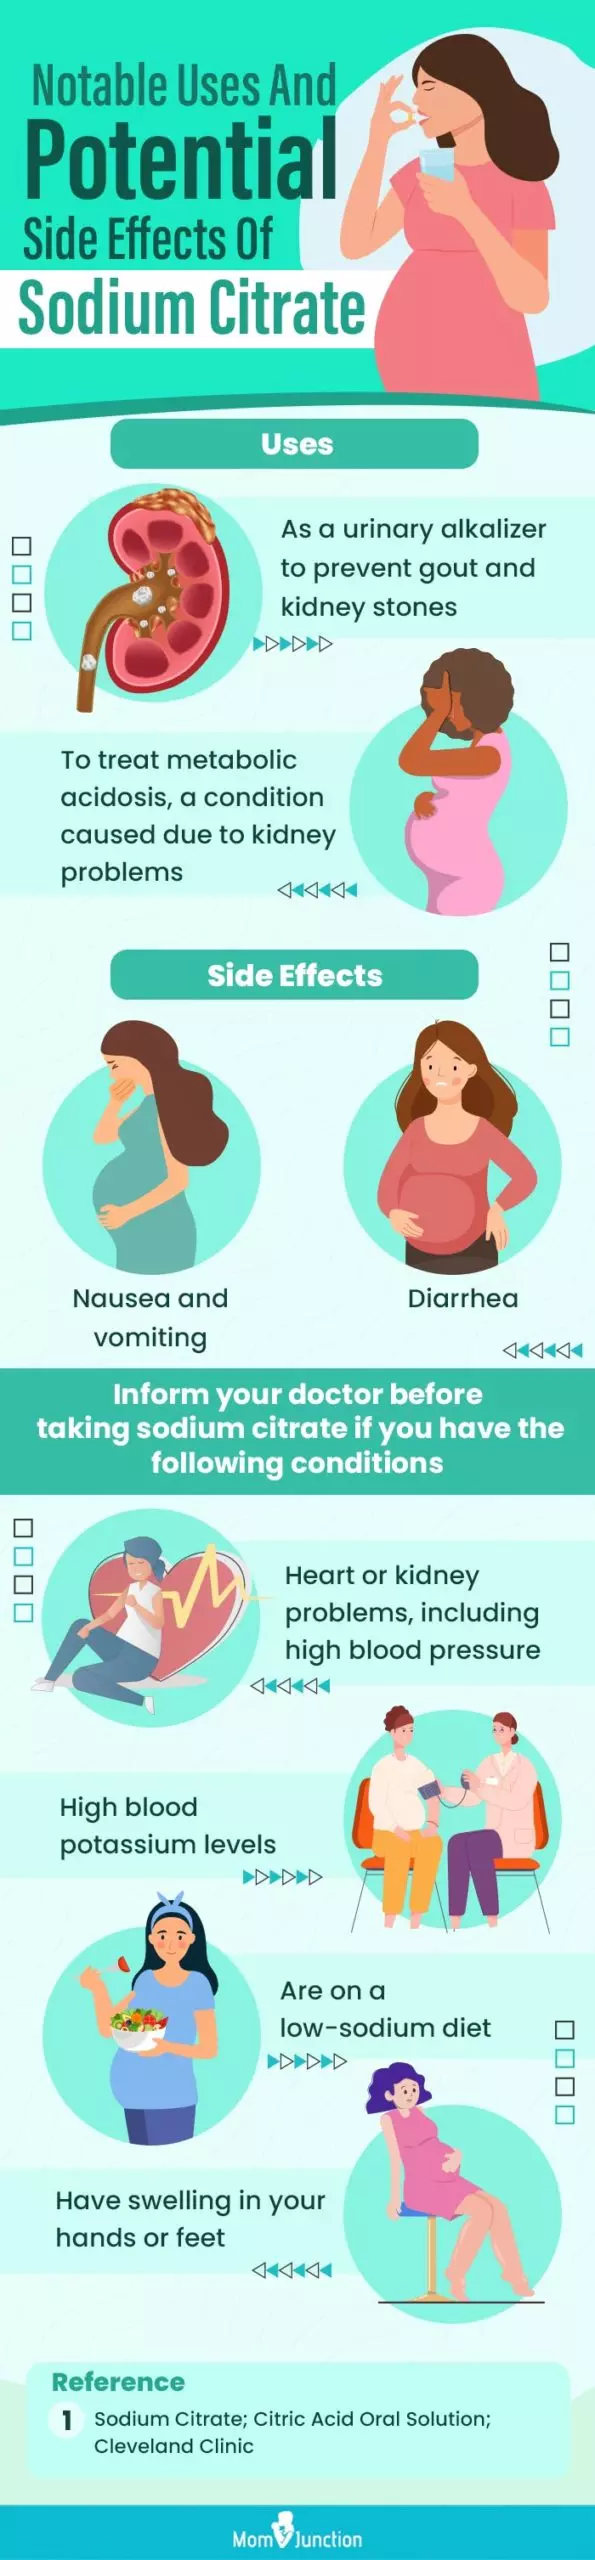 notable uses and potential side effects of sodium citrate (infographic)